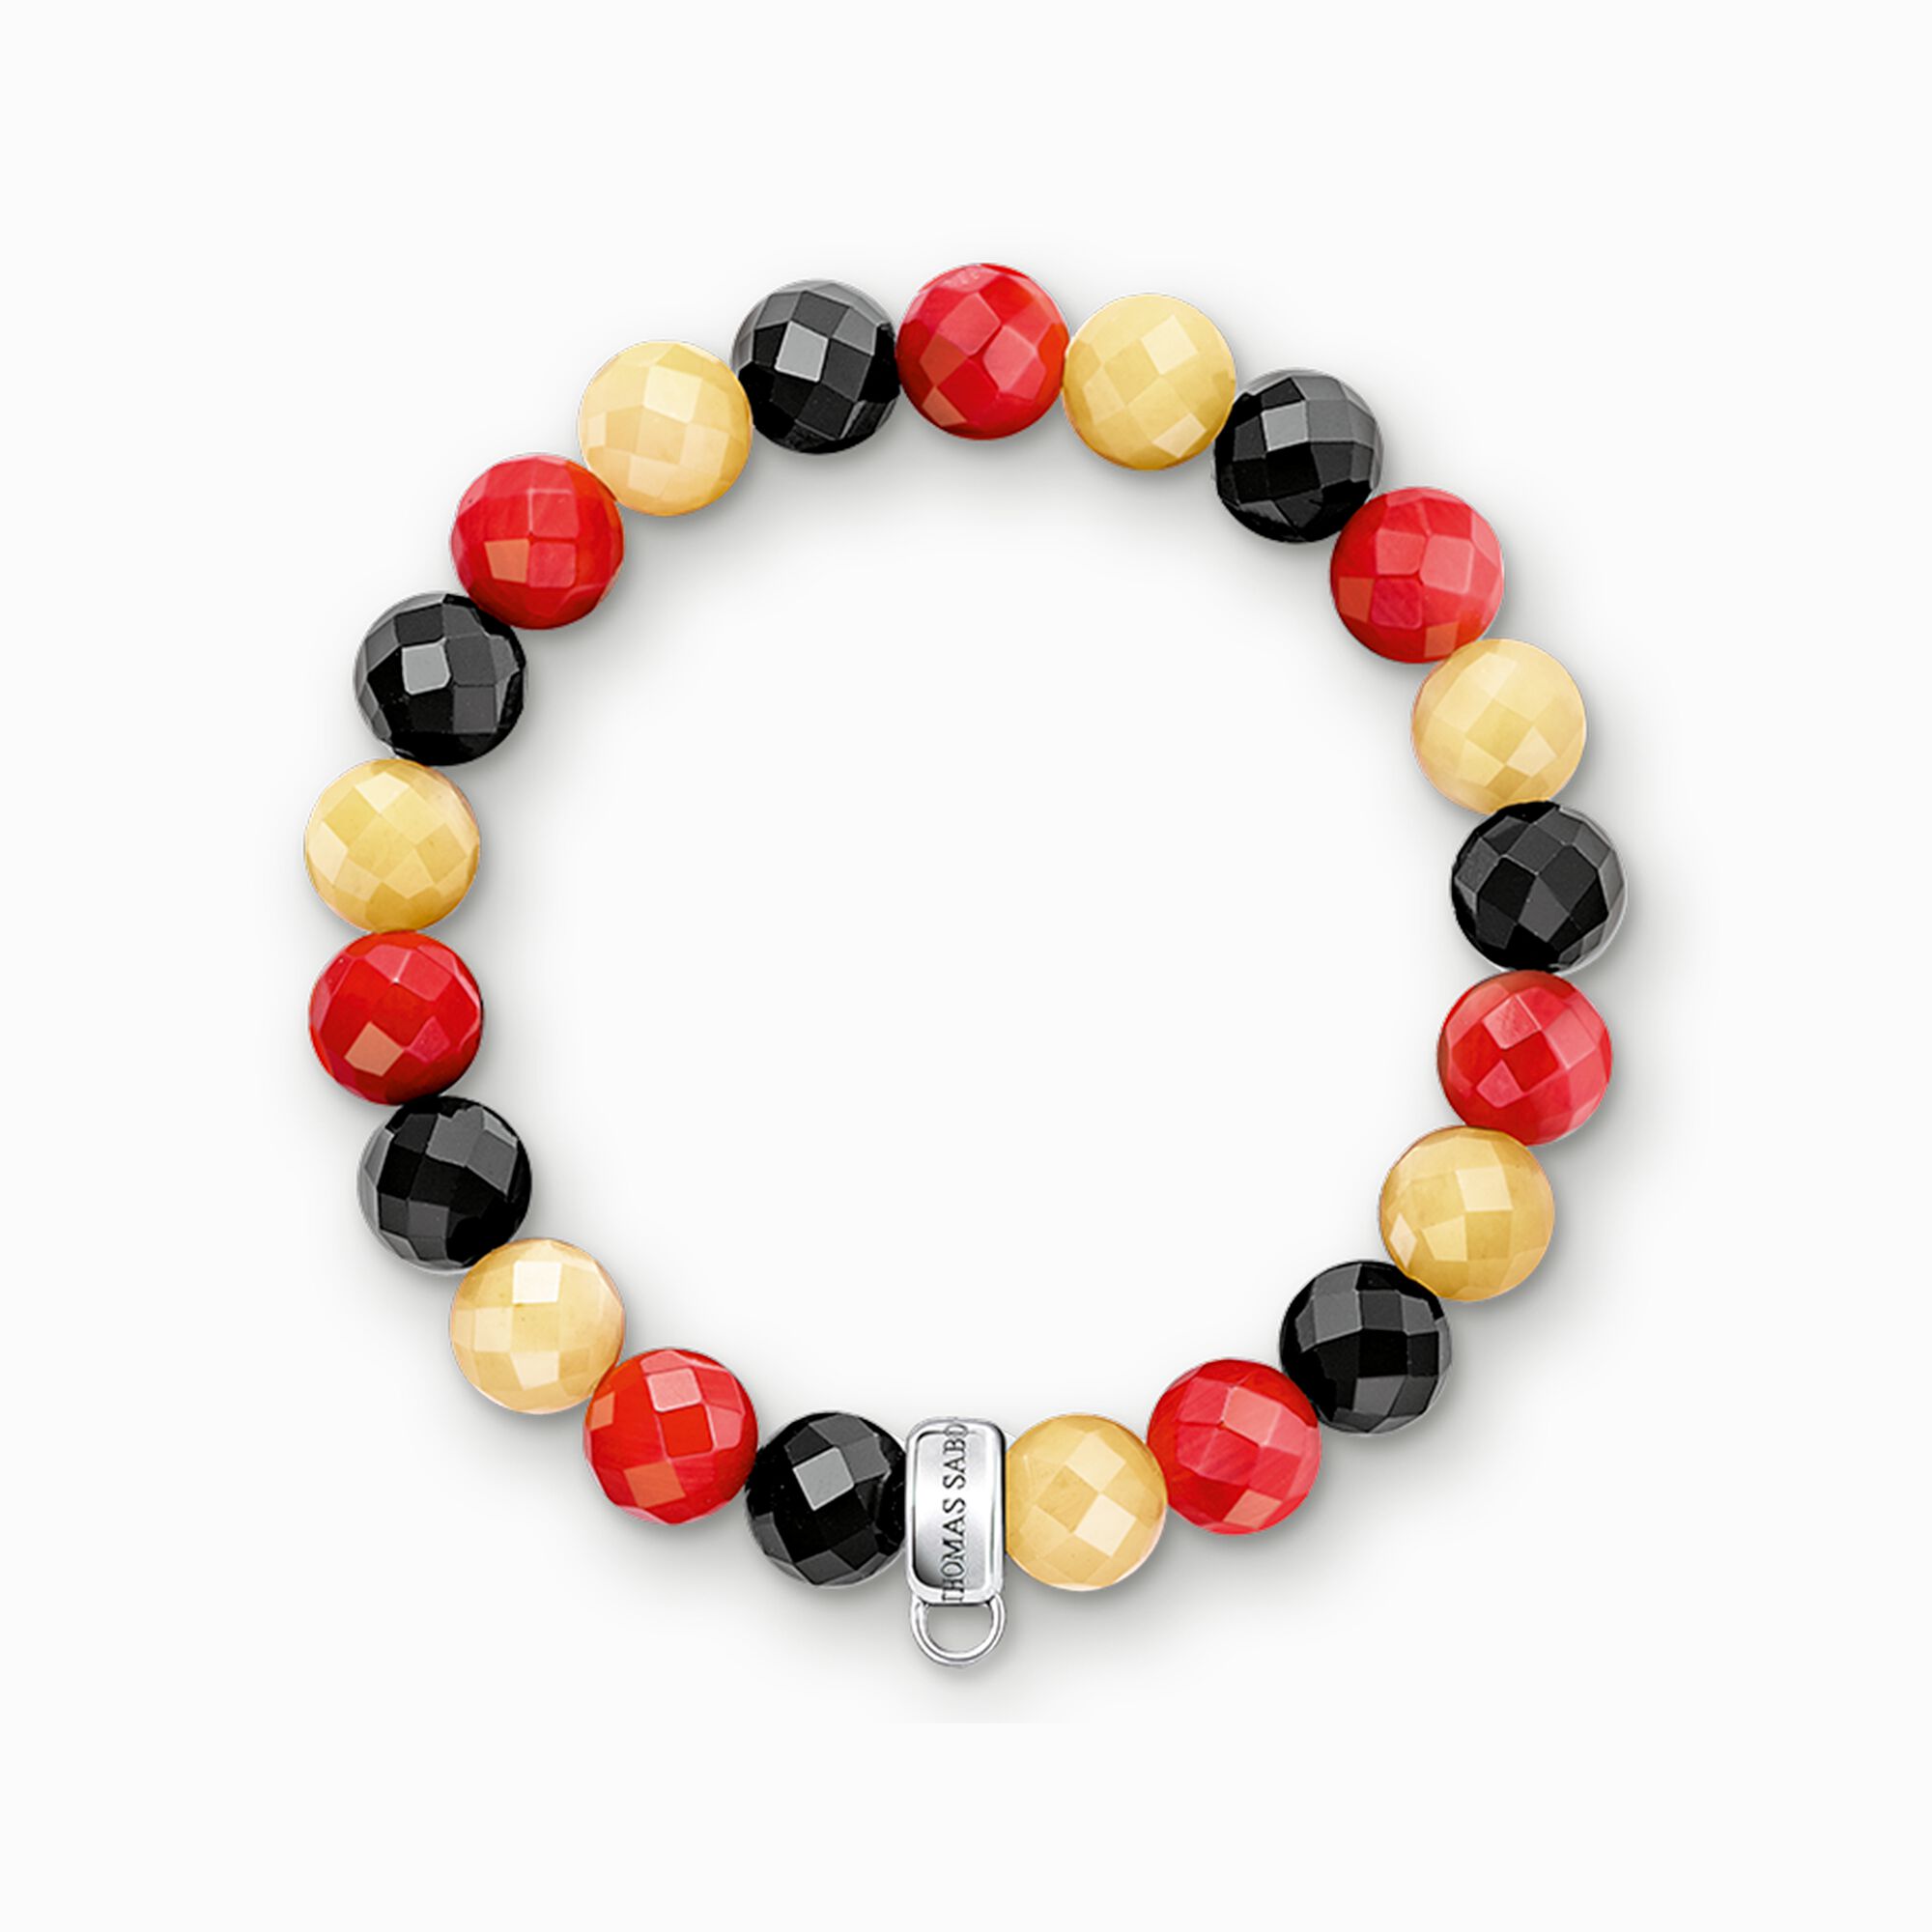 Charm bracelet Germany from the Charm Club collection in the THOMAS SABO online store